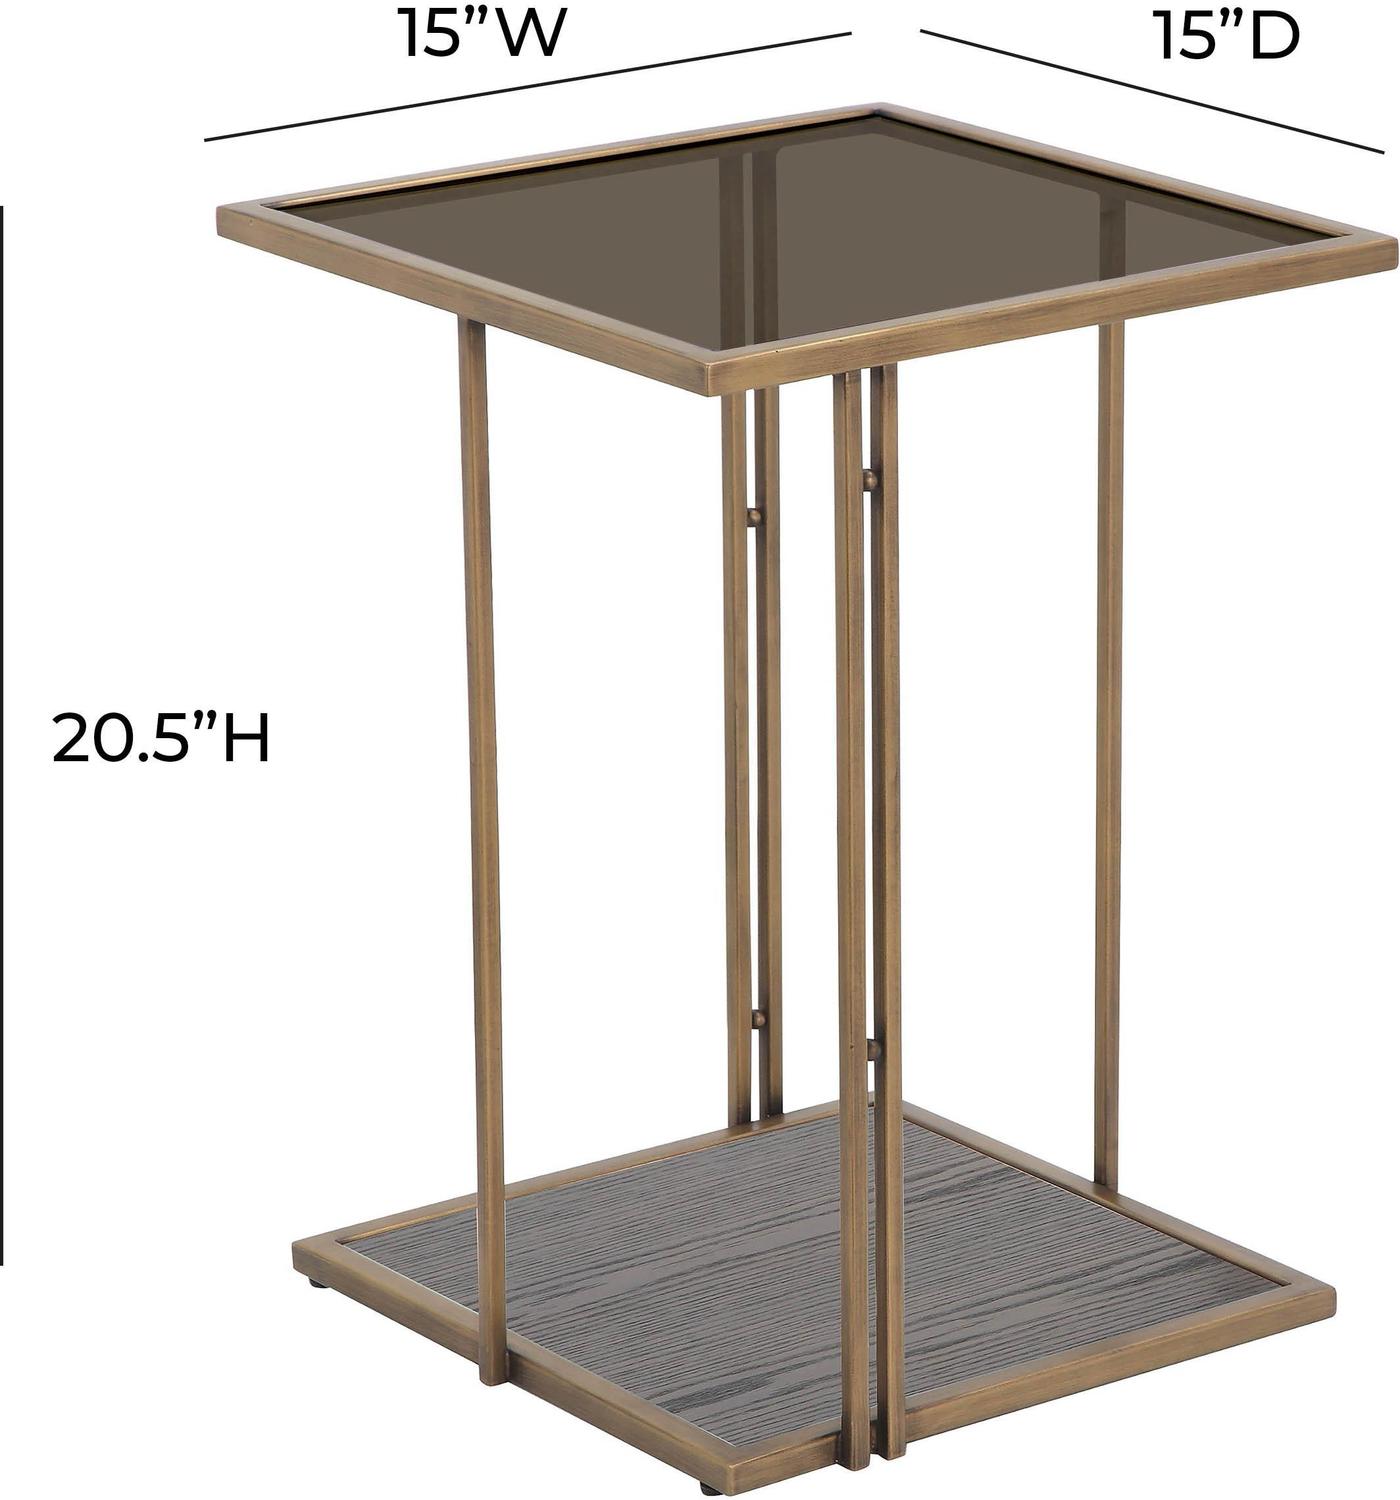 narrow lamp table Contemporary Design Furniture Side Tables Brown